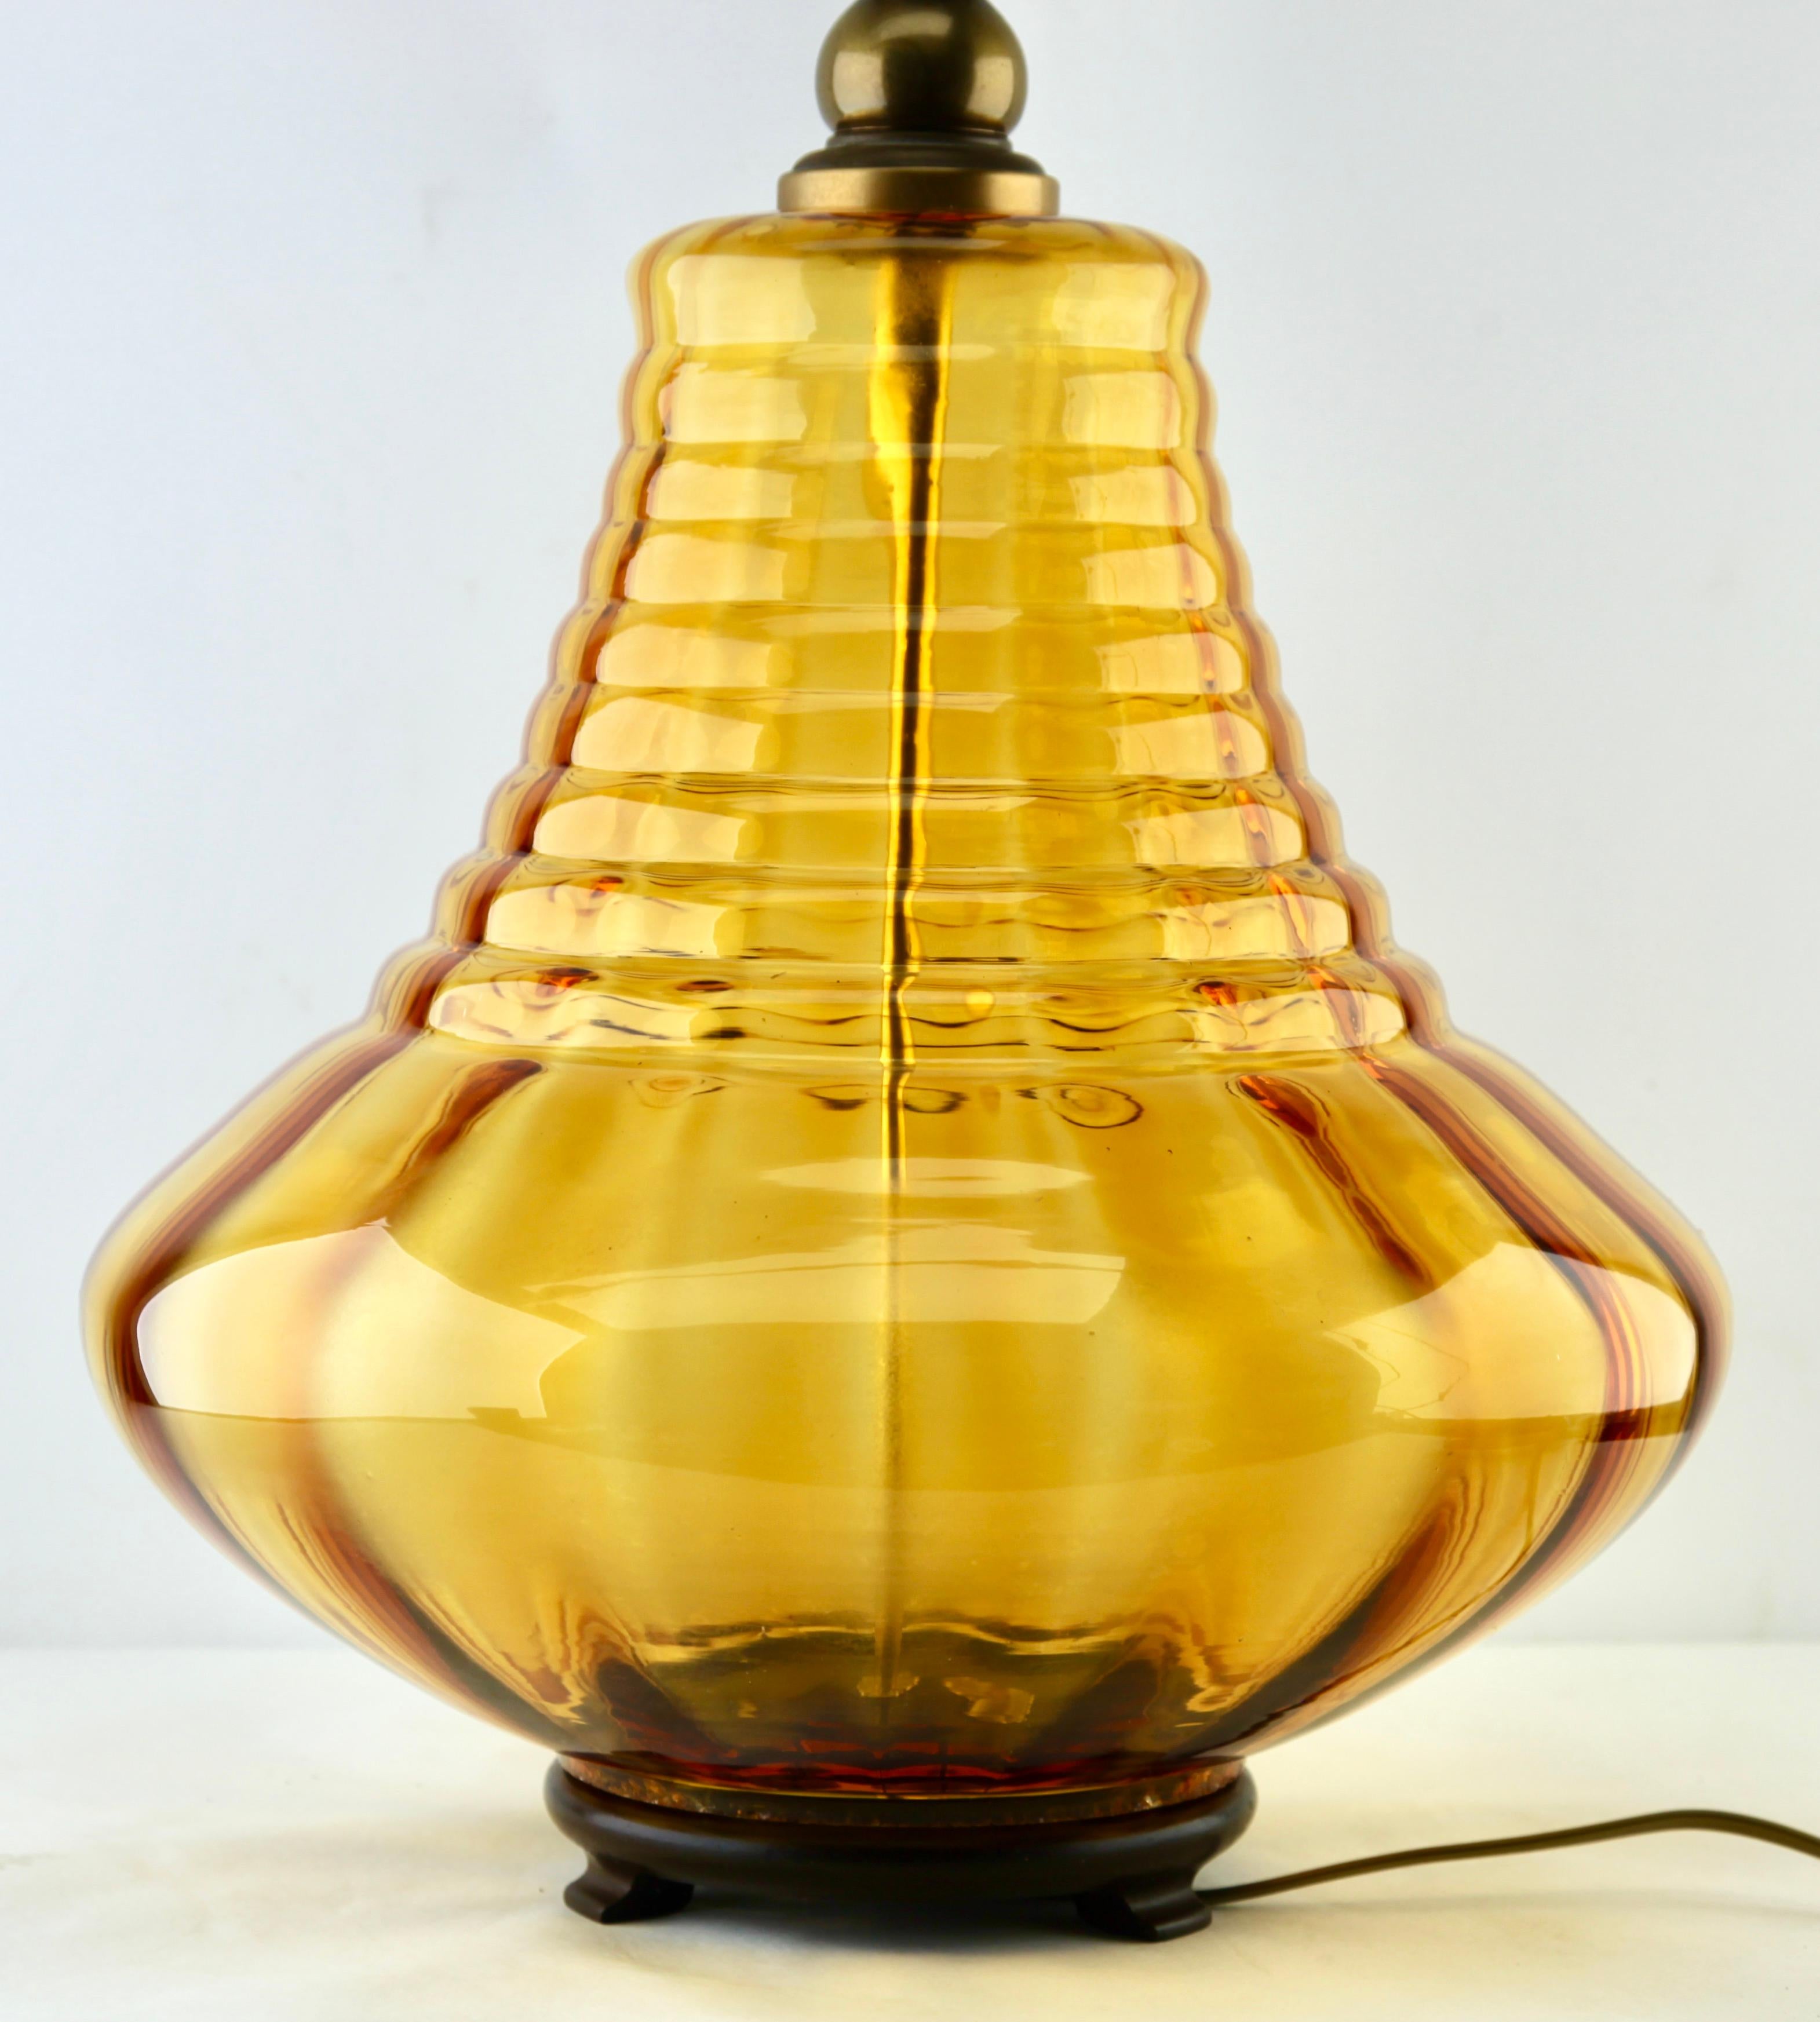 Italian glass table lamp with optical vertical-horizontal ribs
with a light amber tint
Made by Empoli in the midcentury.

Photography fails to capture the simple elegant illumination provided by this lamp.

In excellent condition having